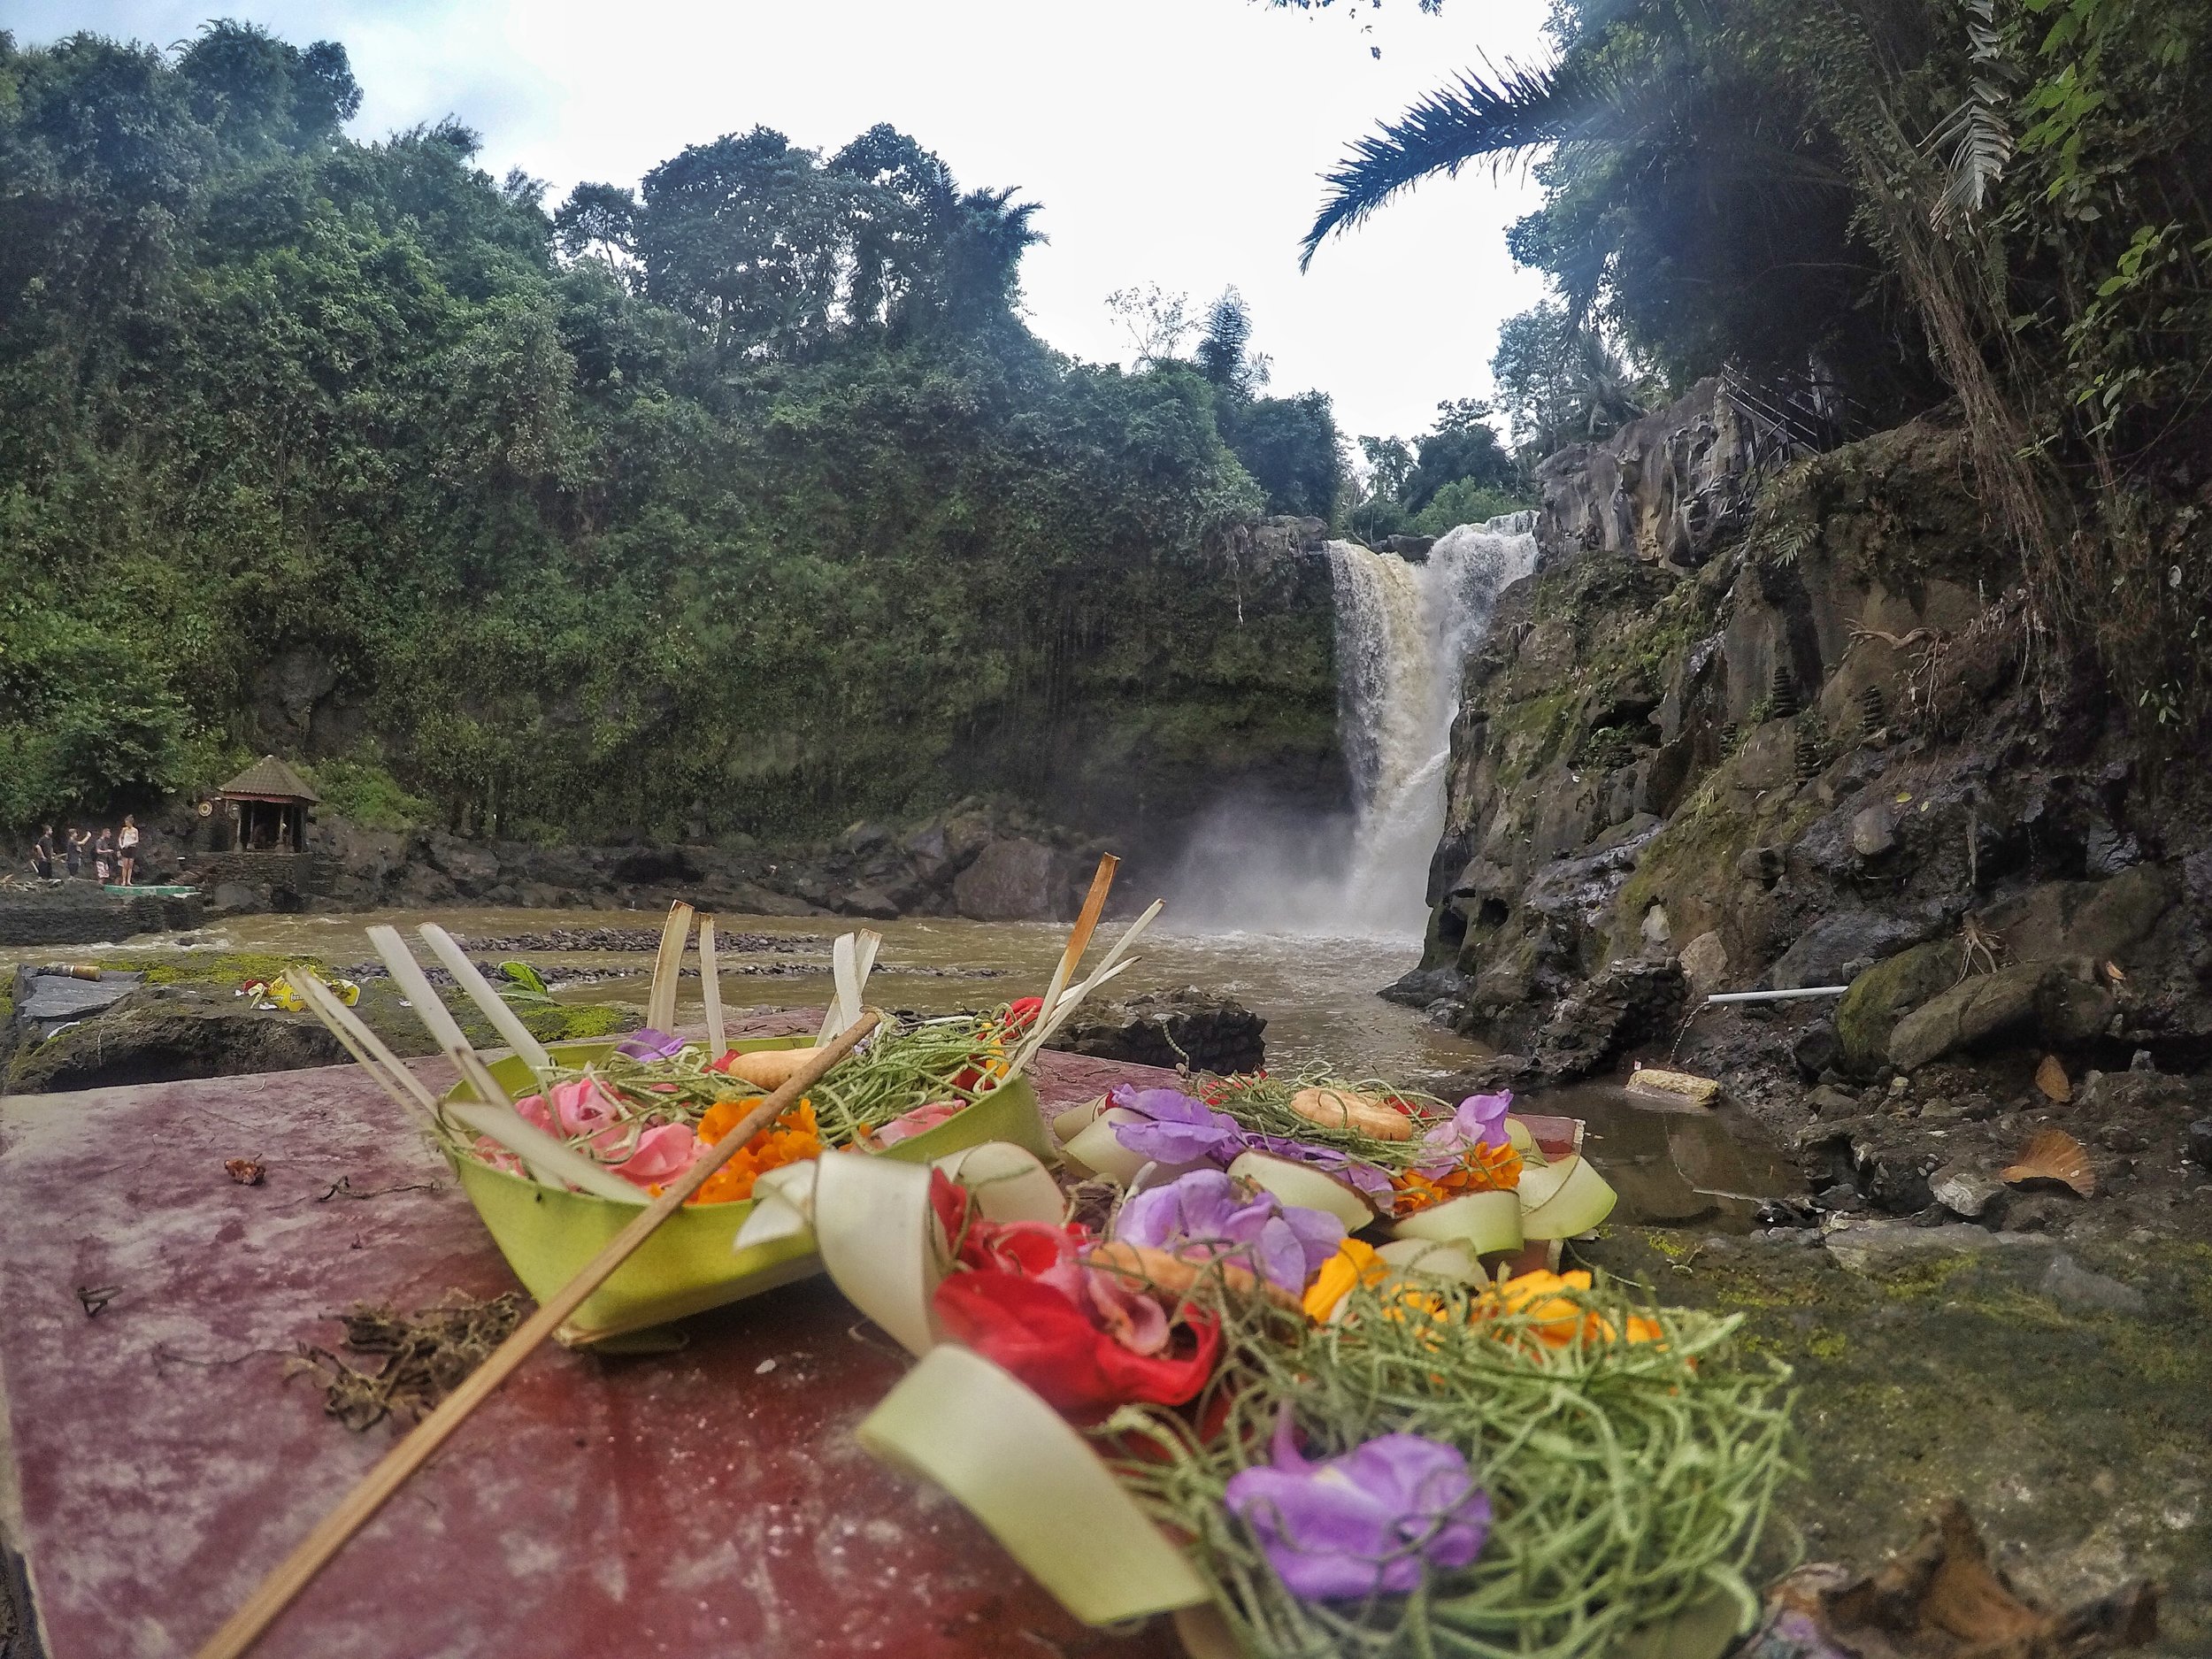 You can find these daily offerings everywhere in Bali!